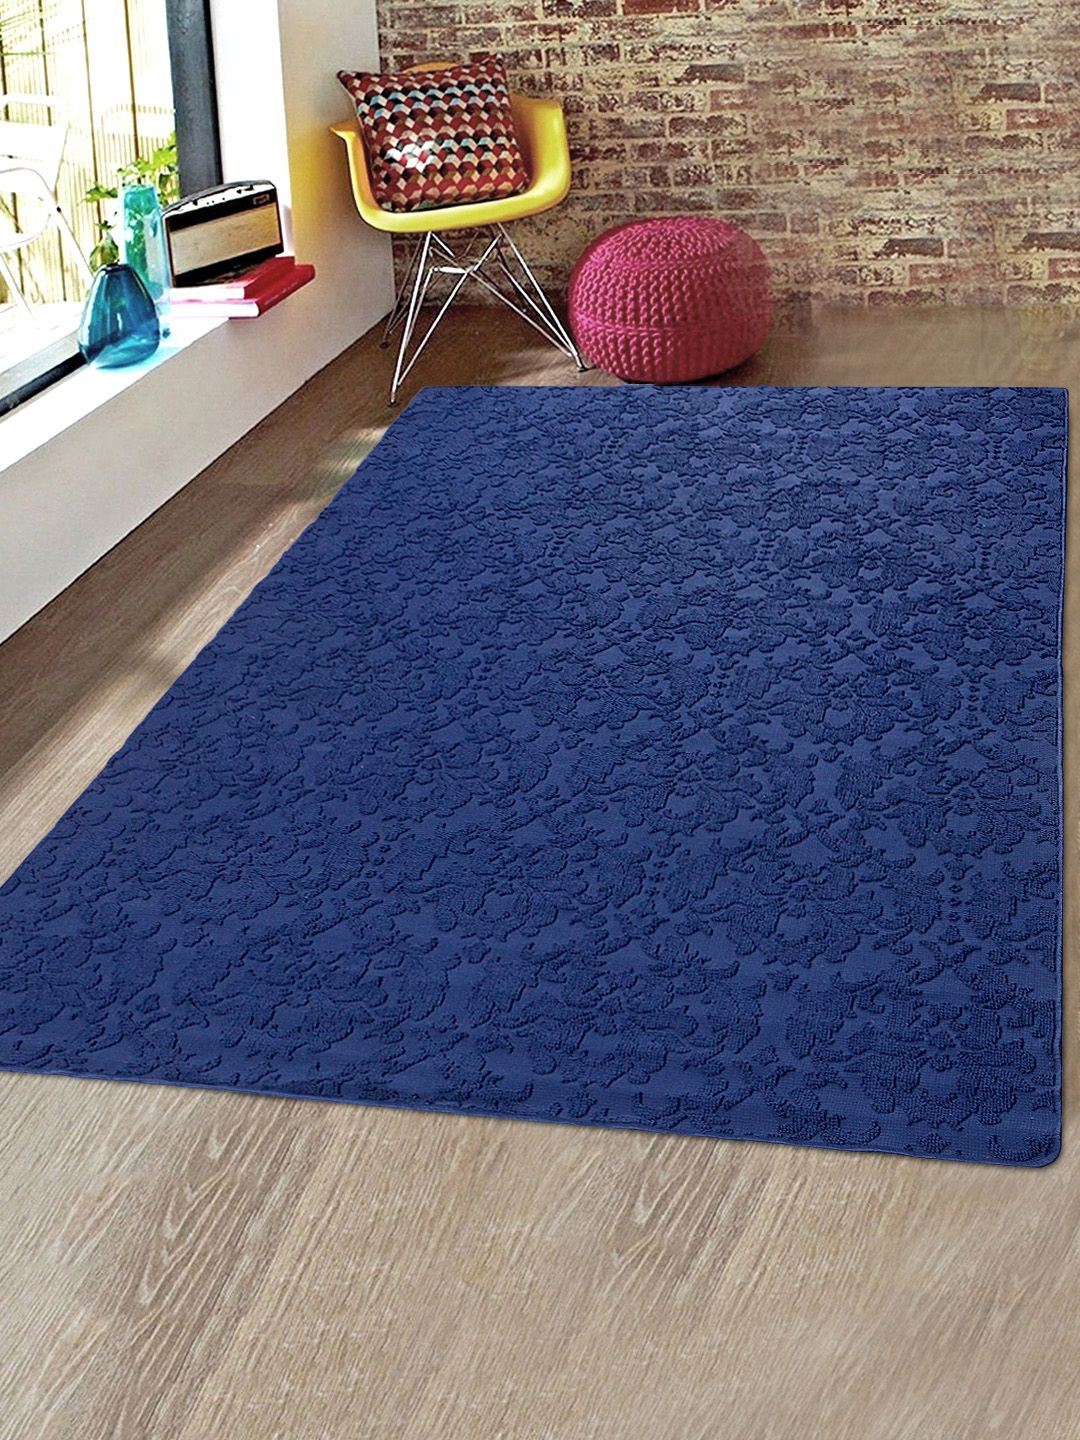 Saral Home Blue Floral Patterned Microfiber Anti-Skid Carpet Price in India